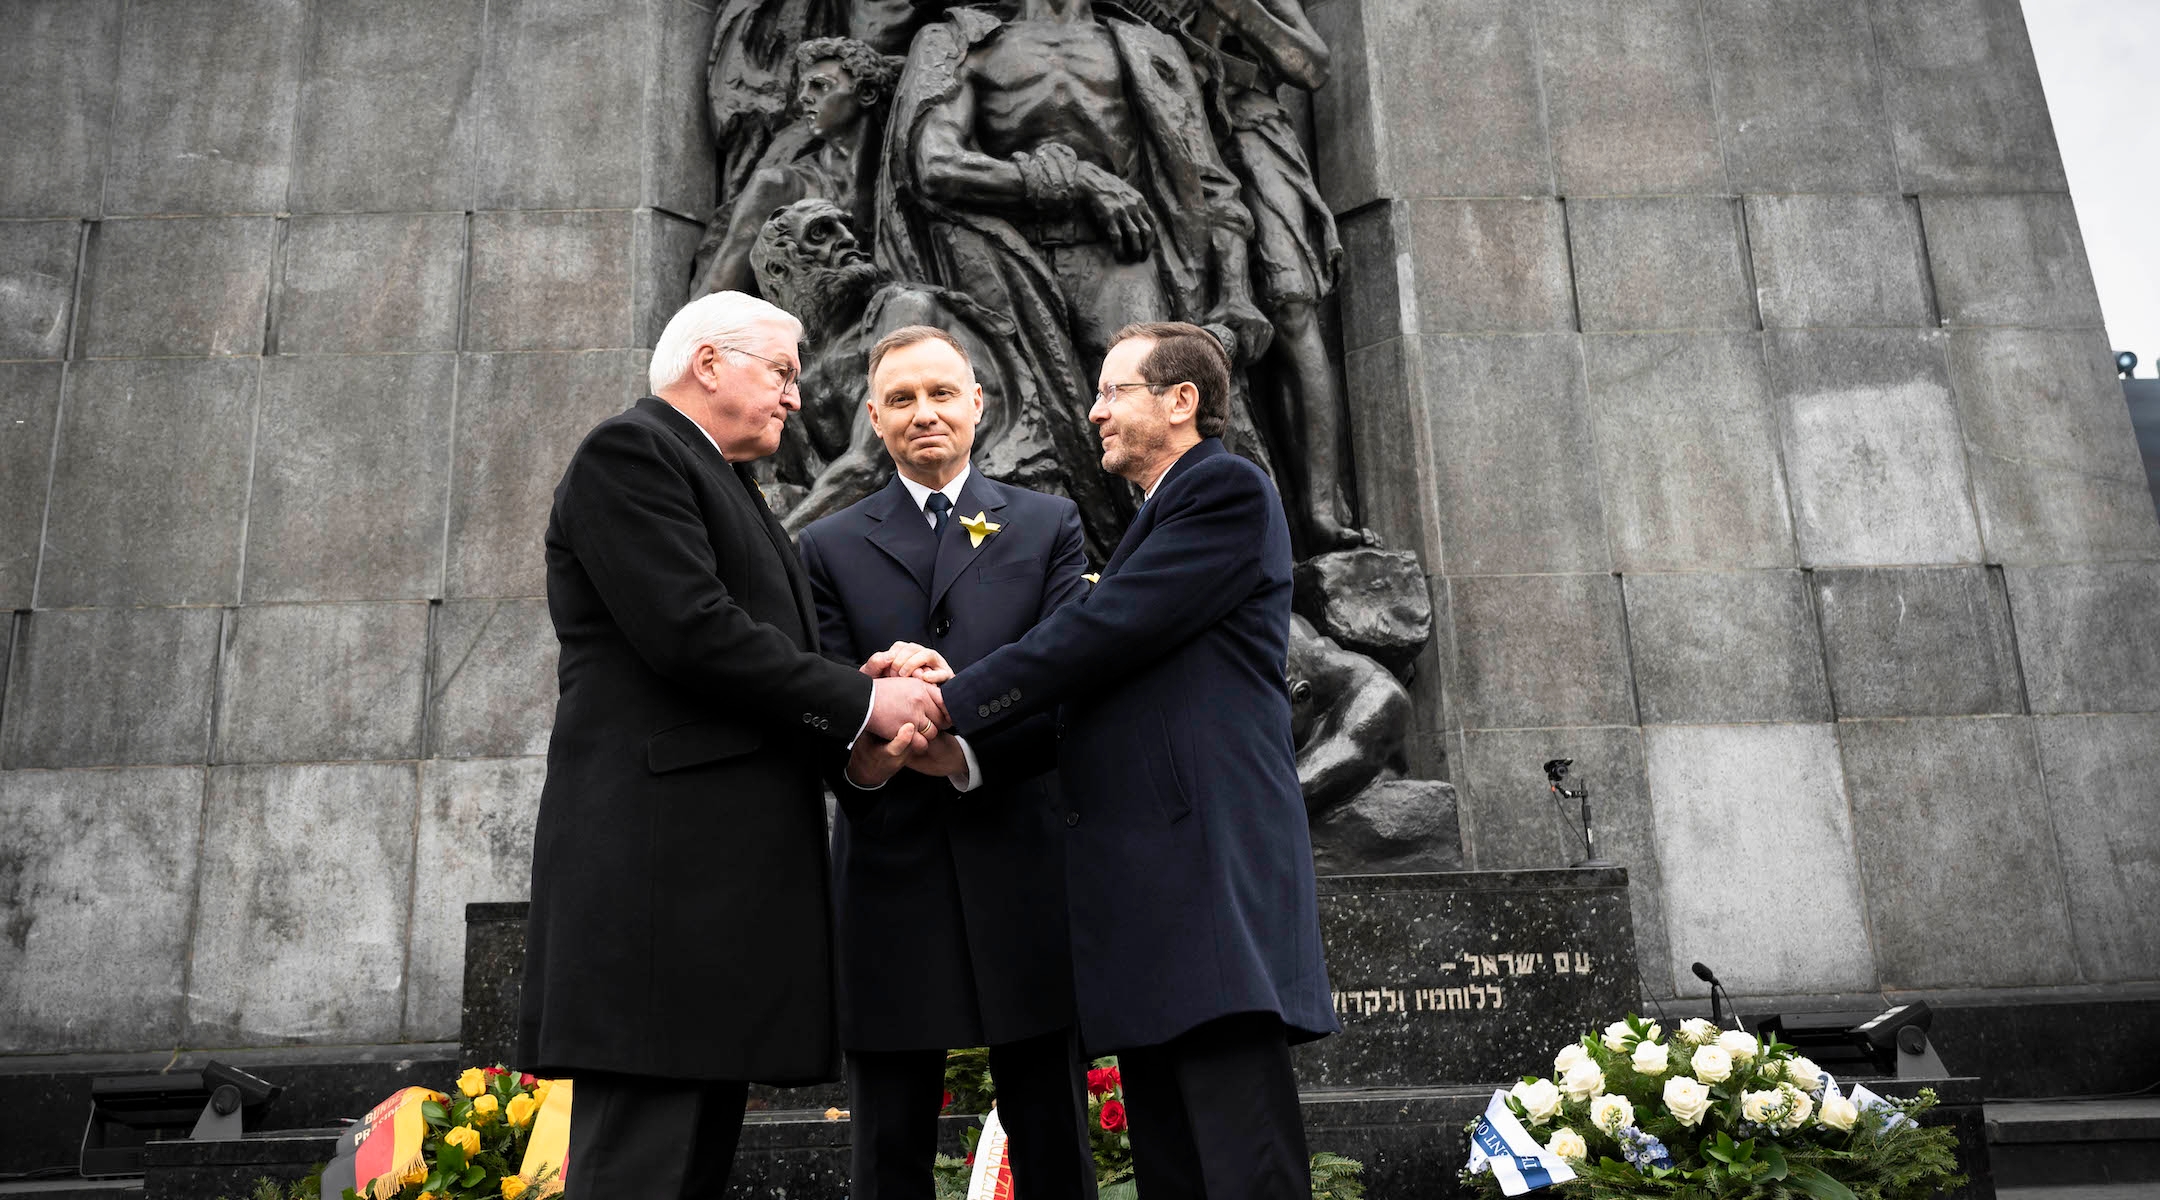 From left to right: German President Frank-Walter Steinmeier, Polish President Andrzej Duda and Israeli President Issac Herzog hold hands before the 80th anniversary commemoration of the Warsaw Ghetto Uprising, in front of the city’s Monument to the Ghetto Heroes, April 19, 2023. (German Government Press Office/Getty Images)